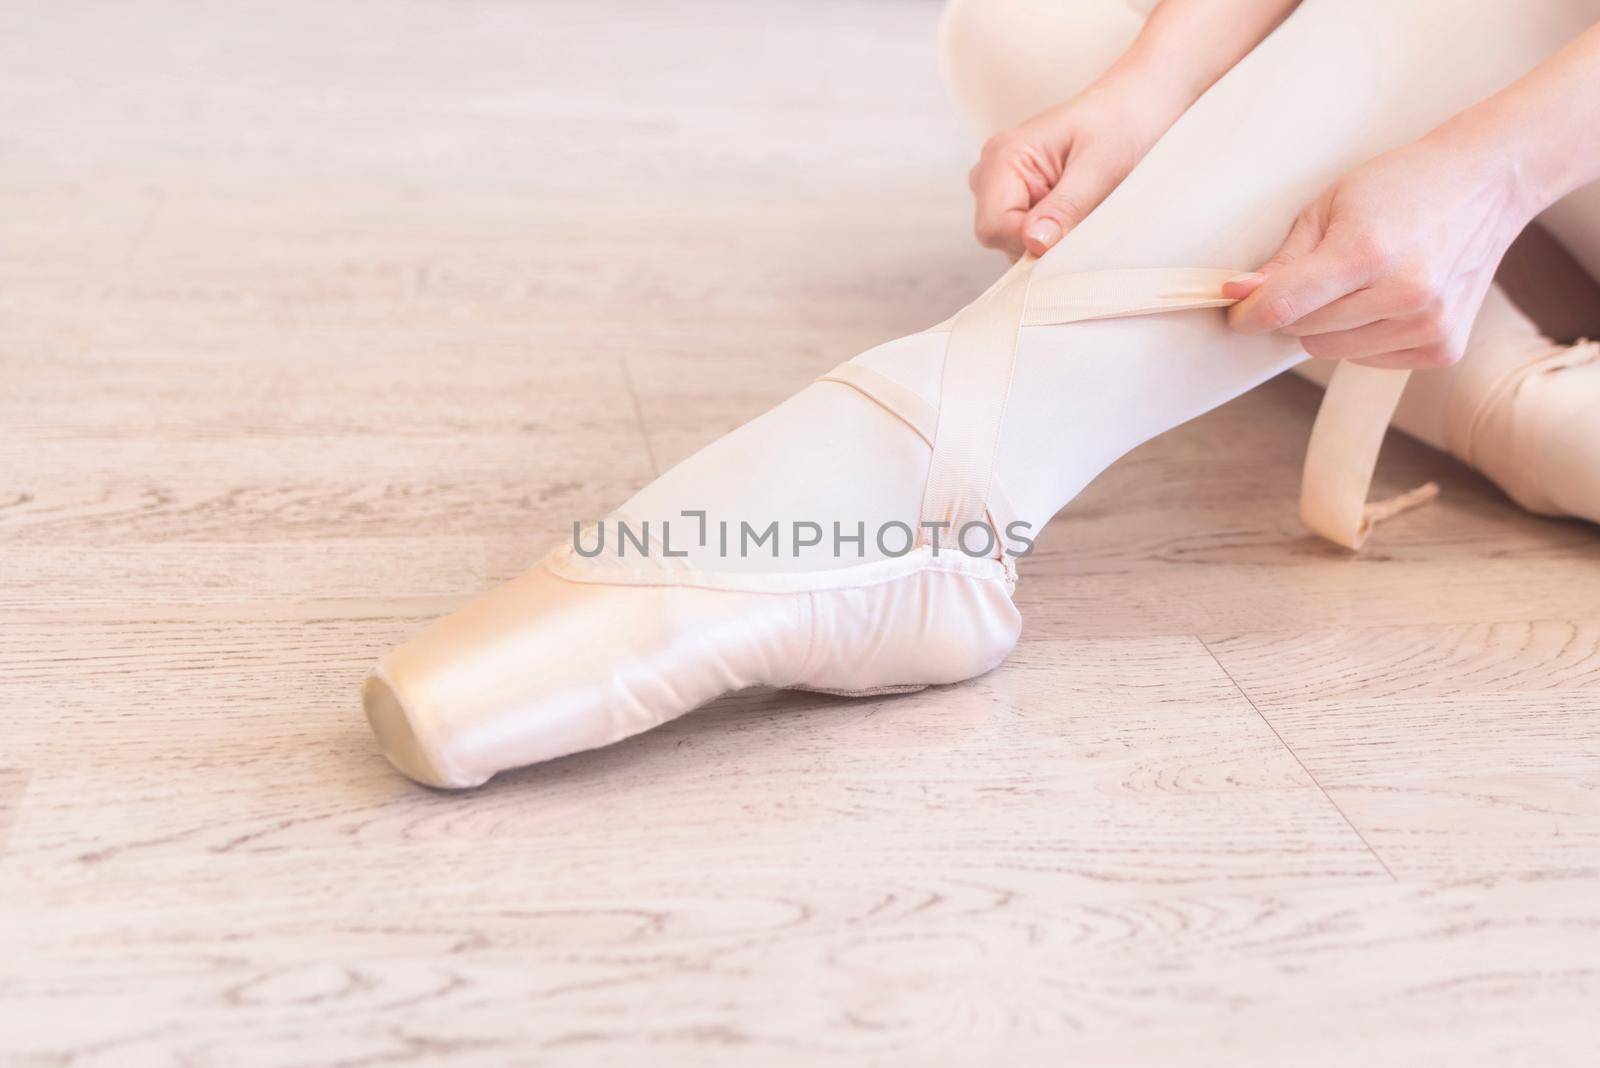 A ballerina sitting on the floor tying her ballet shoes. close view